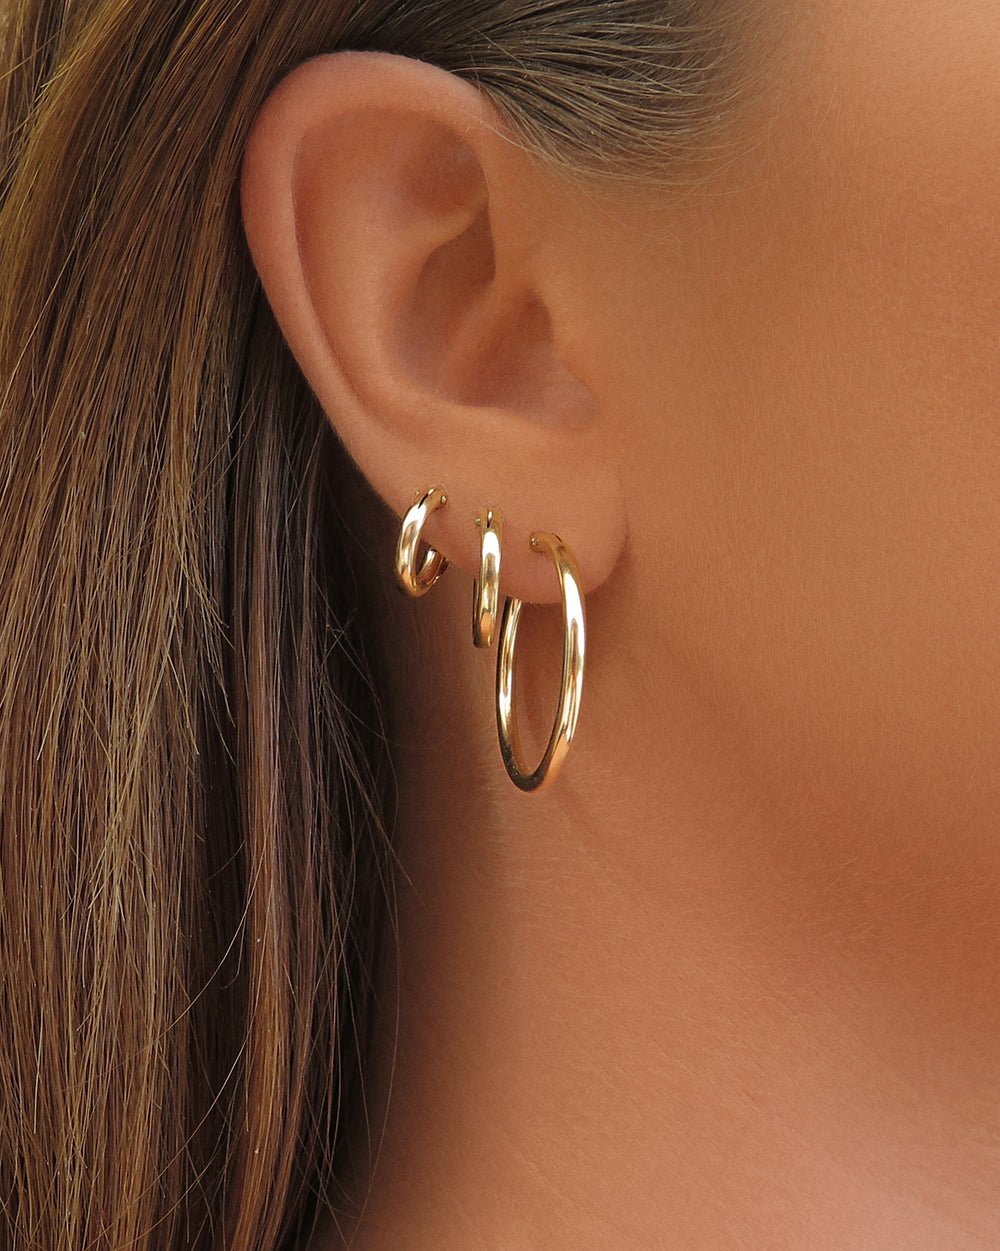 Load image into Gallery viewer, THICK HOOP EARRINGS- 14k Yellow Gold - The Littl - 14k Yellow Gold Fill - 12mm Earrings
